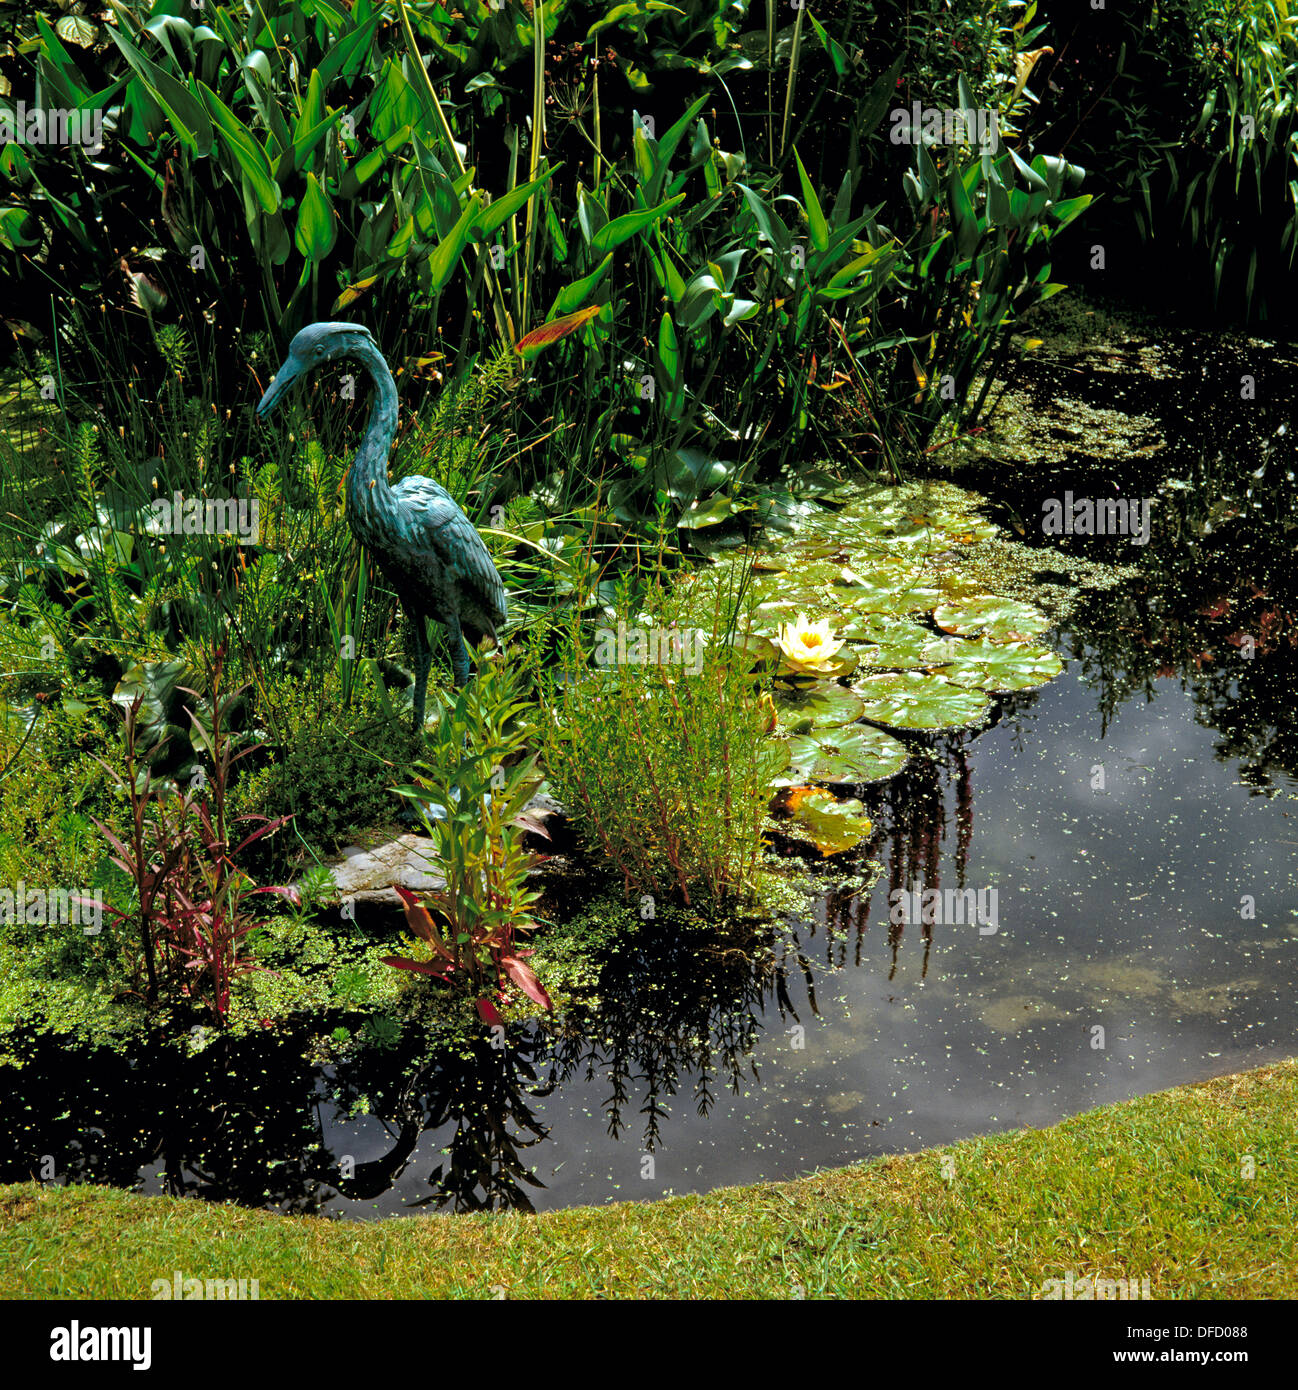 A bronze sculpture of a heron guards the fish in this garden pond from attack by real herons Stock Photo